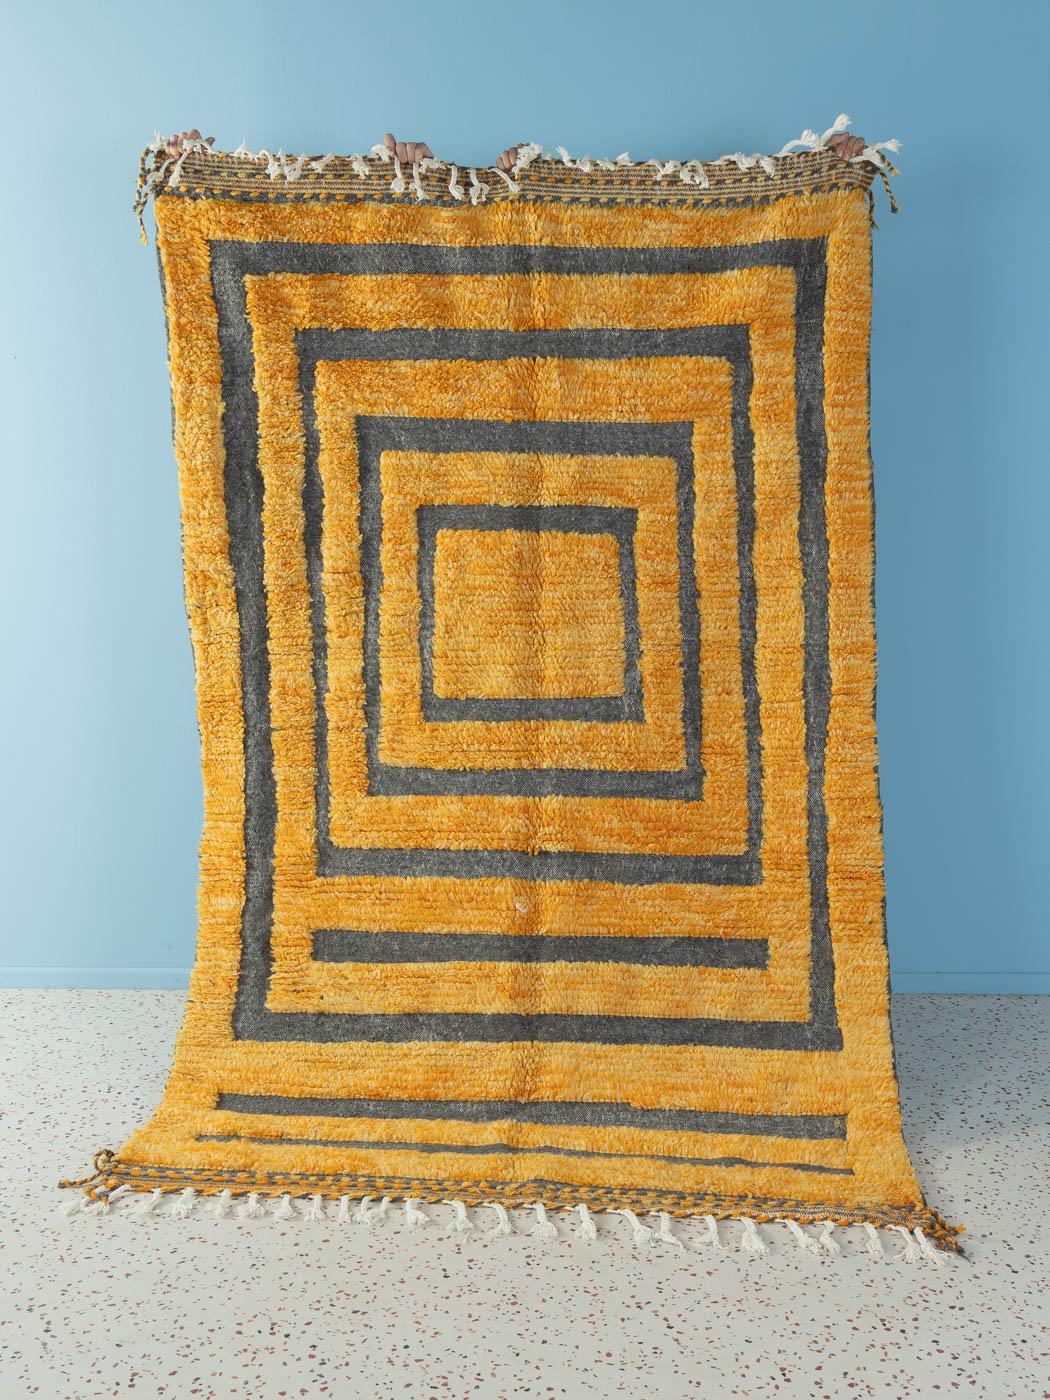 Candide is a contemporary 100% wool rug – thick and soft, comfortable underfoot. Our Berber rugs are handwoven and handknotted by Amazigh women in the Atlas Mountains. These communities have been crafting rugs for thousands of years. One knot at a